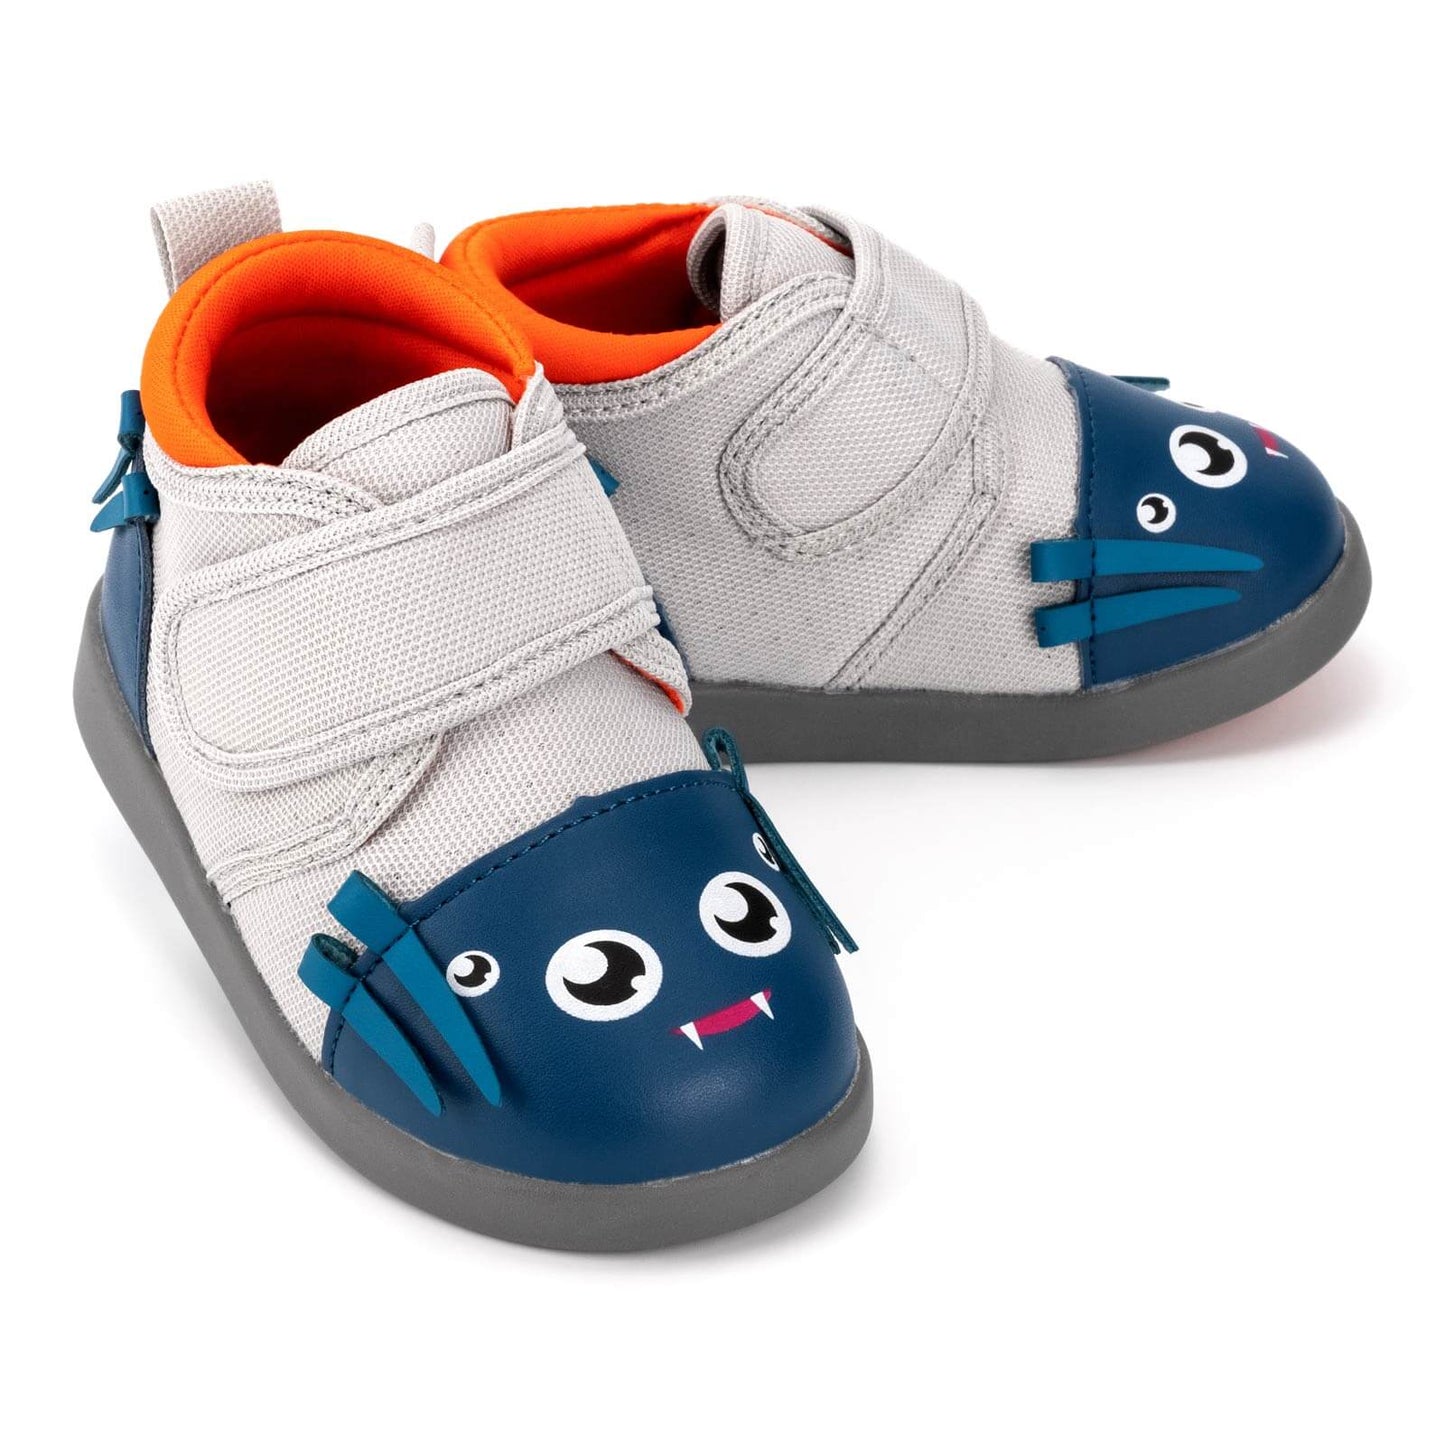 ikiki Squeaky Shoes for Toddlers with On/Off Squeaker Switch